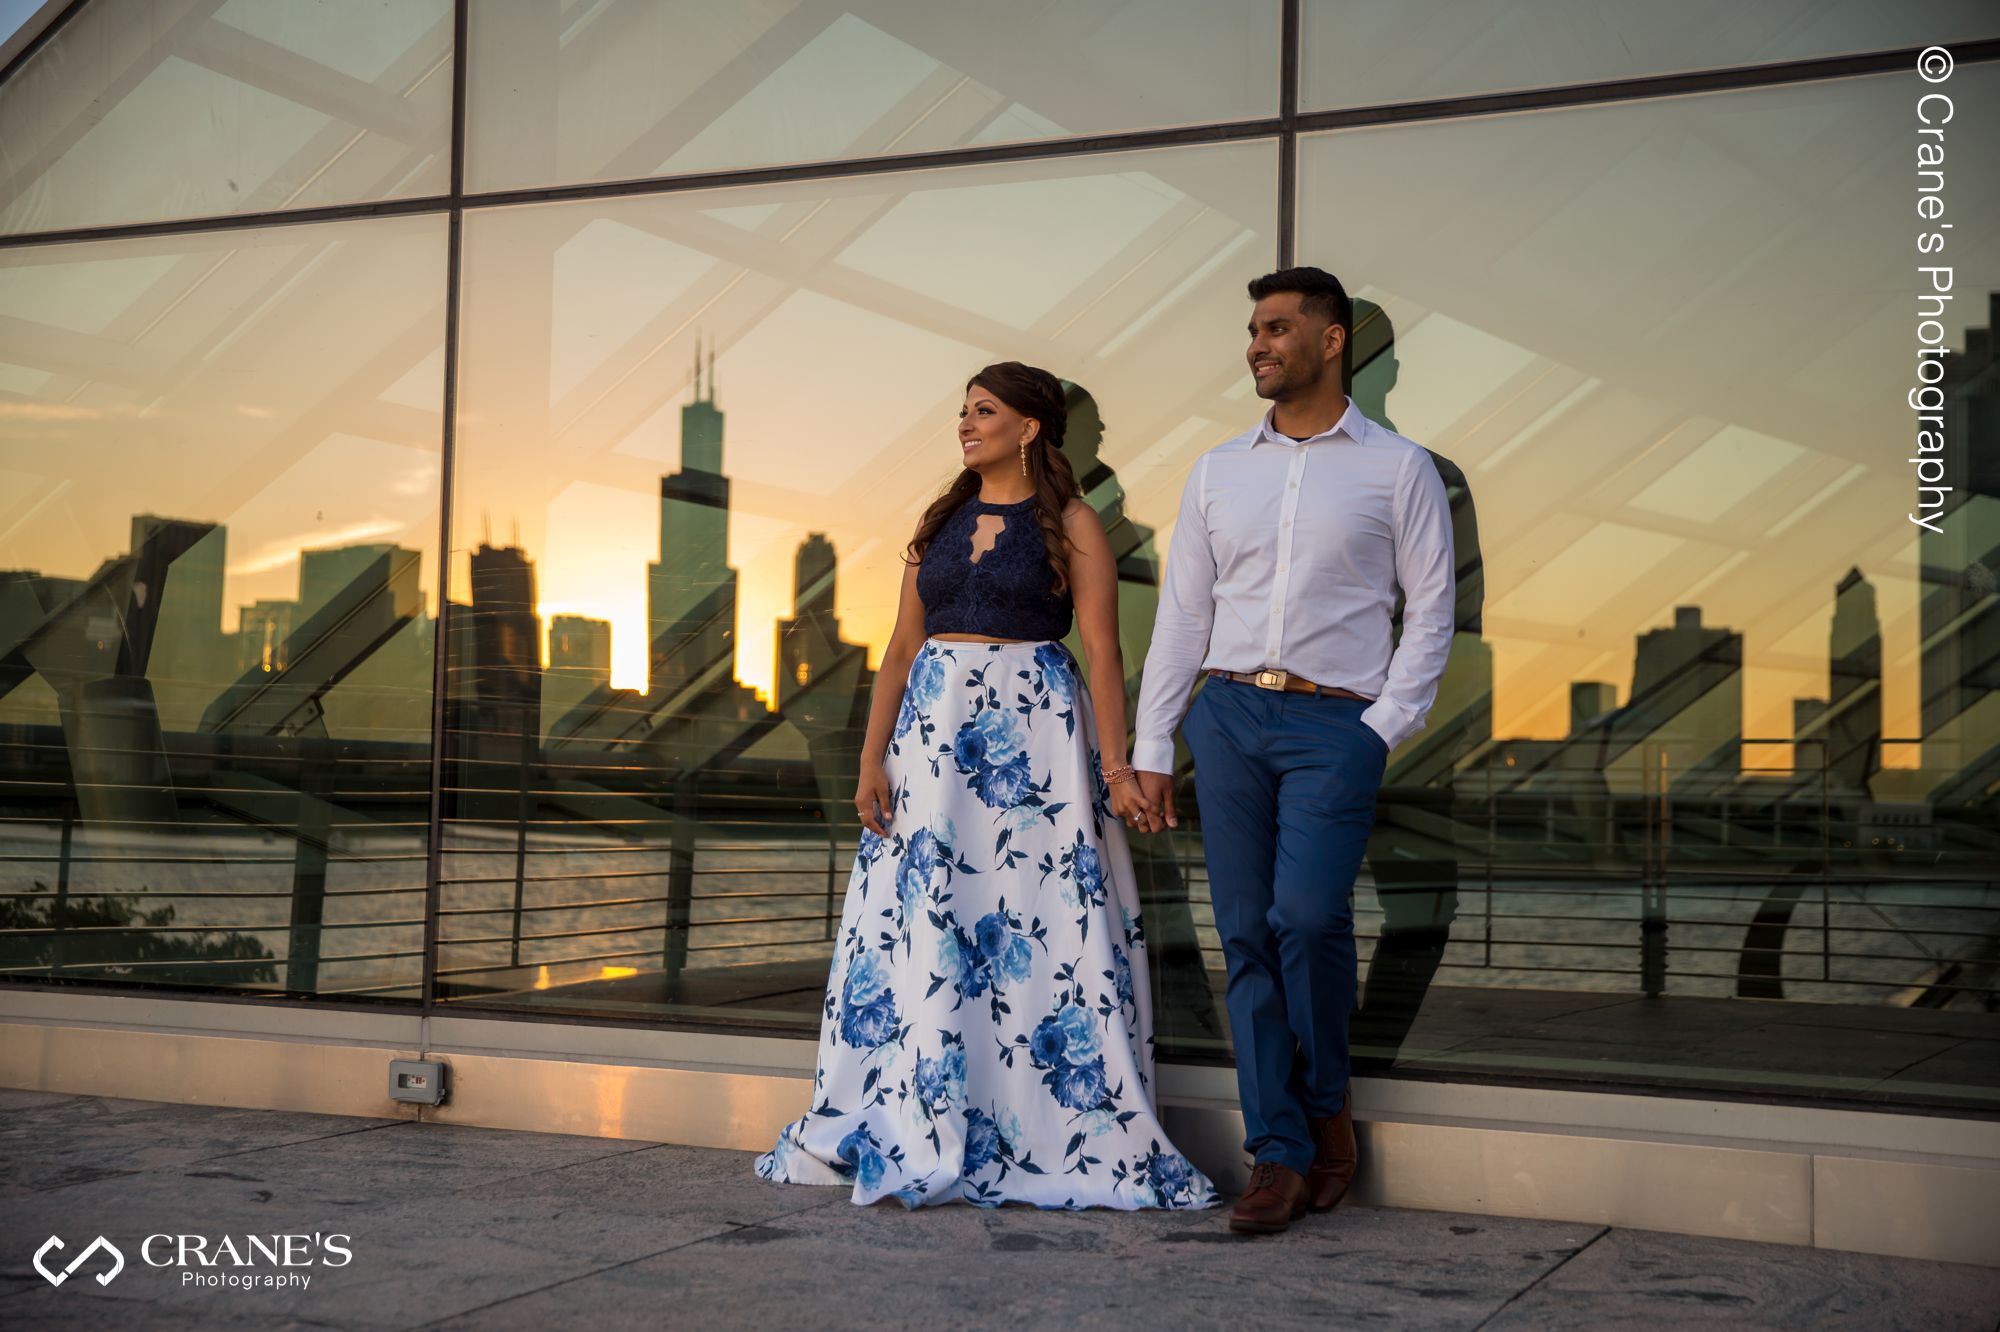 An engaged couple looking at downtown Chicago skyline at sunset over lake Michigan